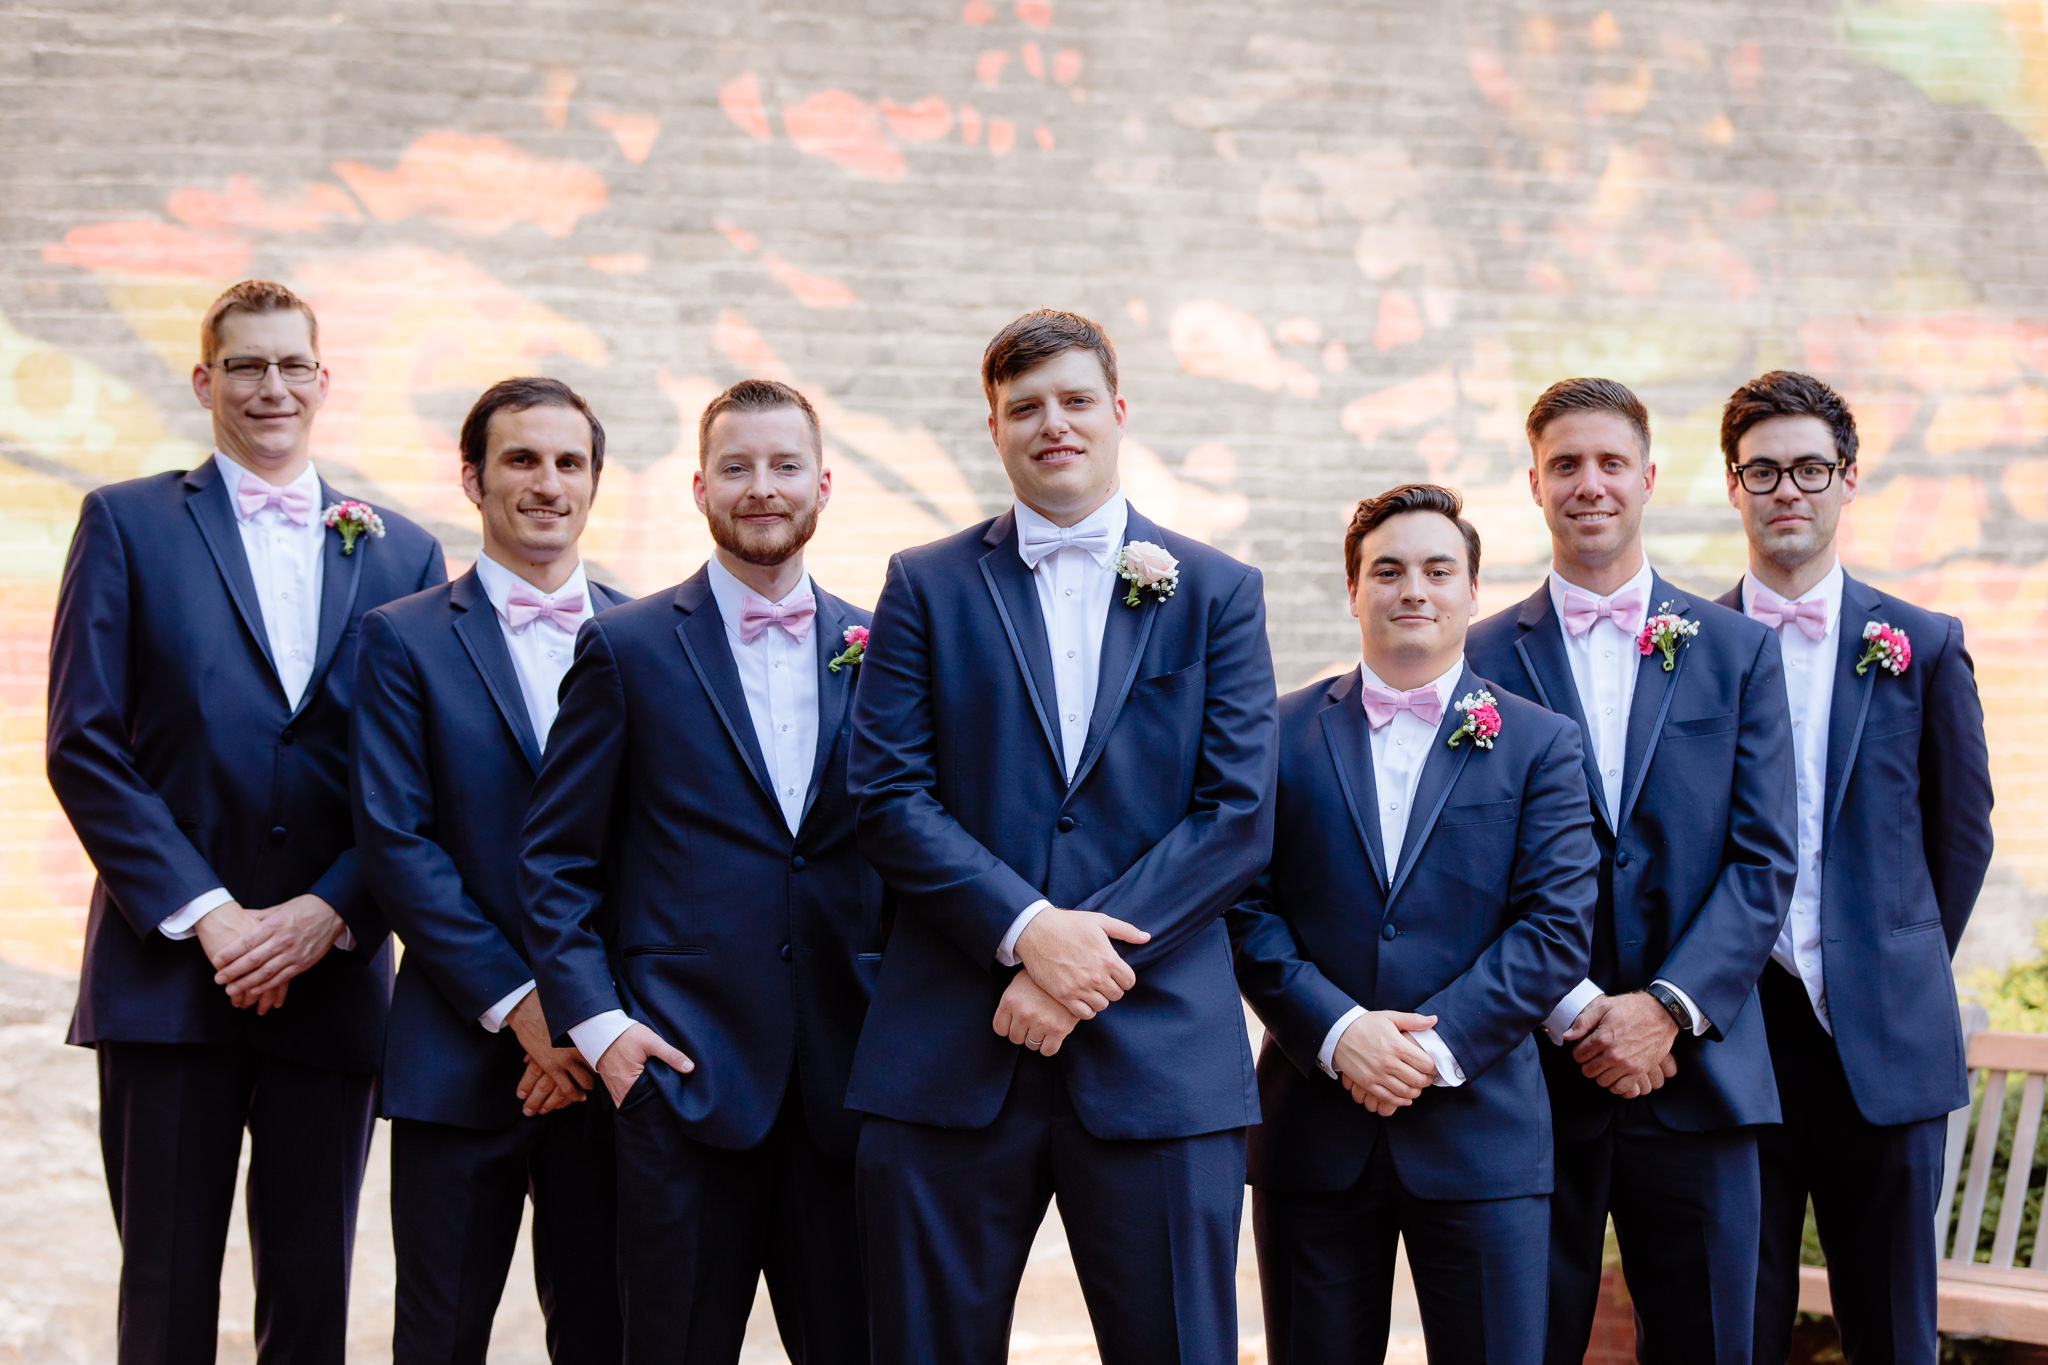 Groomsmen wear blue tuxedos and pink bowties at Duquesne University